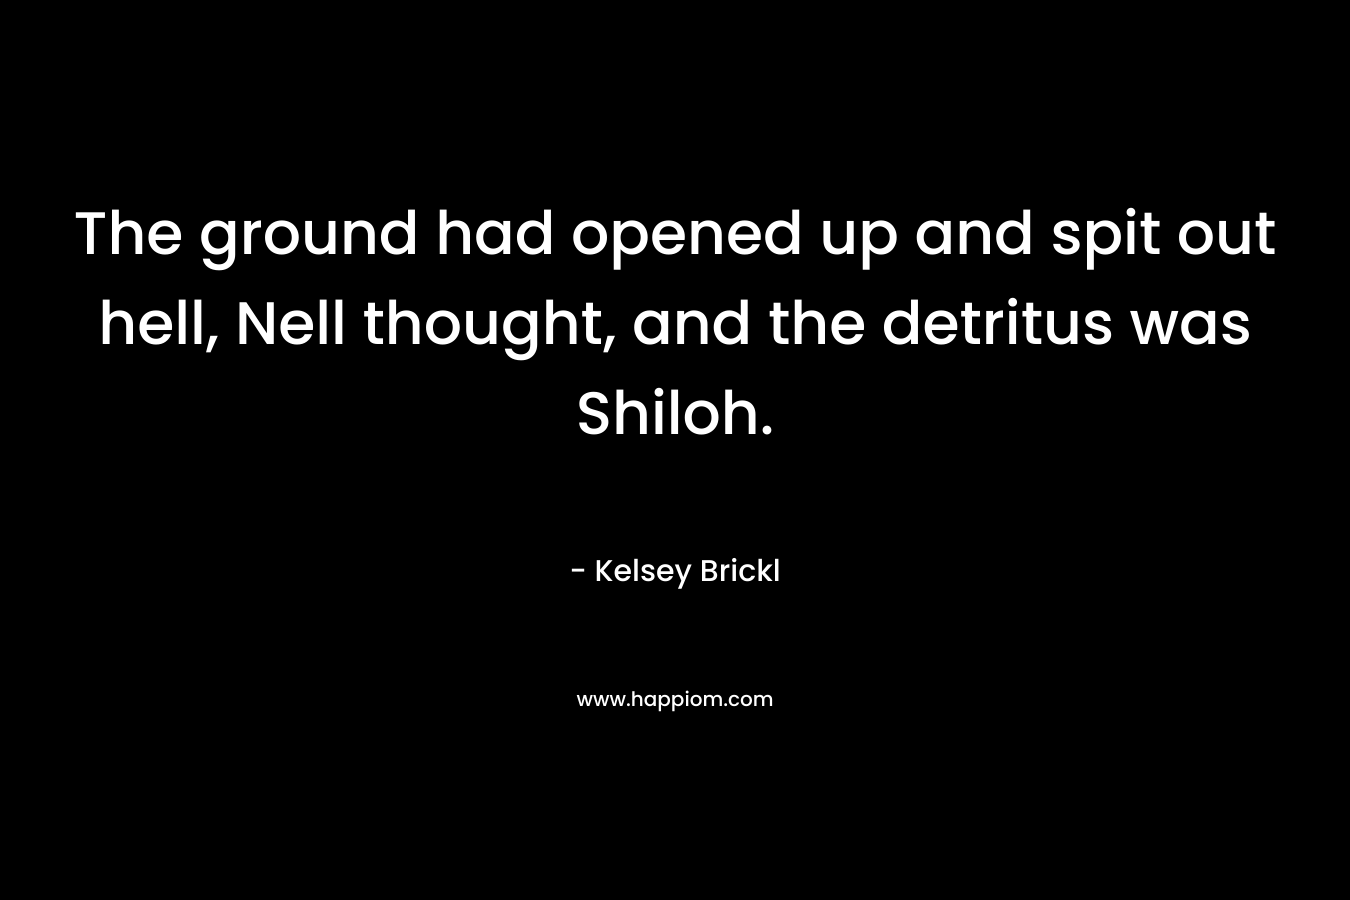 The ground had opened up and spit out hell, Nell thought, and the detritus was Shiloh. – Kelsey Brickl